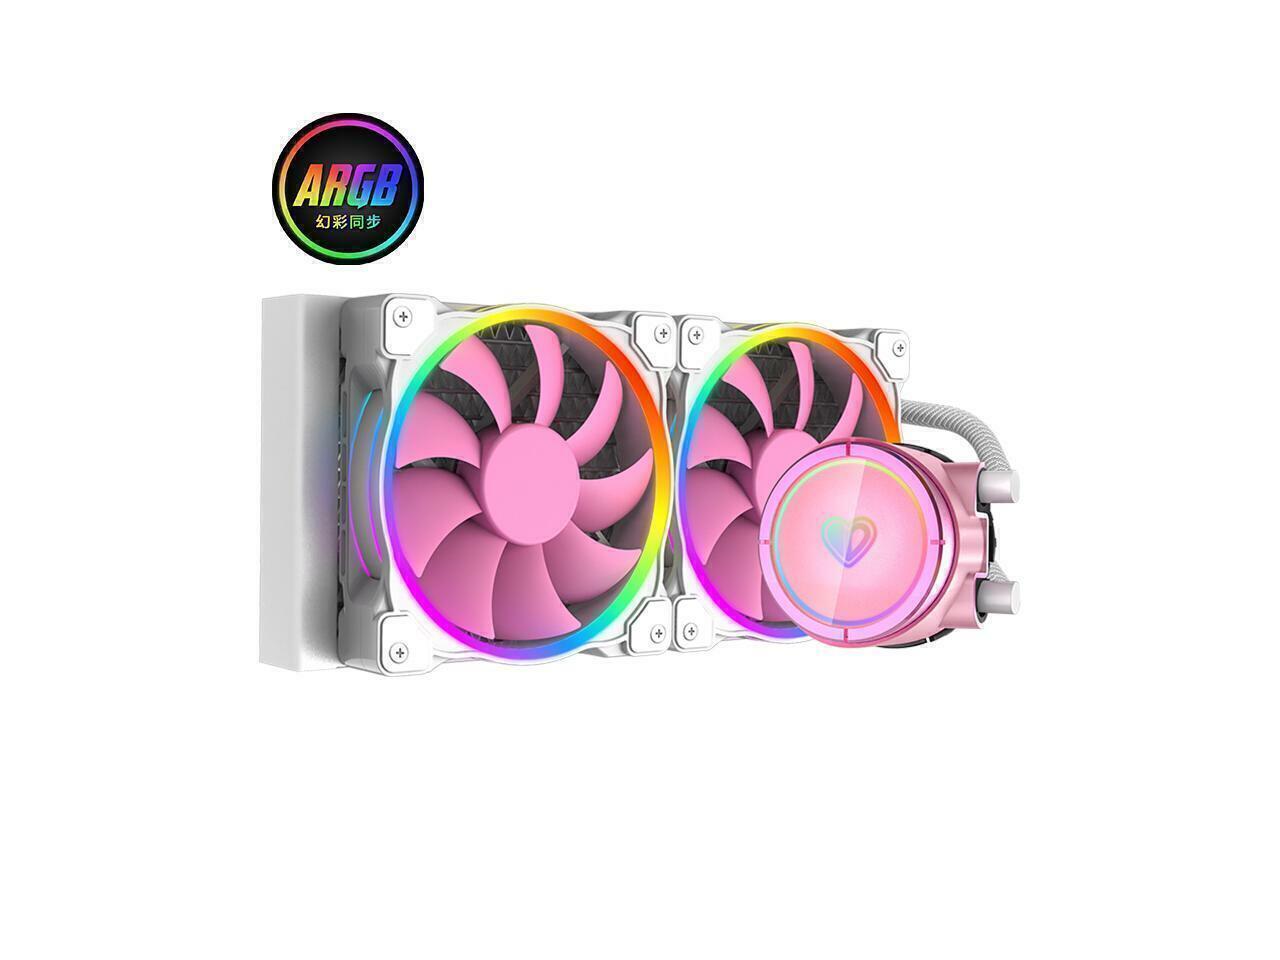 ID-COOLING PINKFLOW 240 CPU Water Cooler 5V Addressable RGB AIO Cooler 240mm